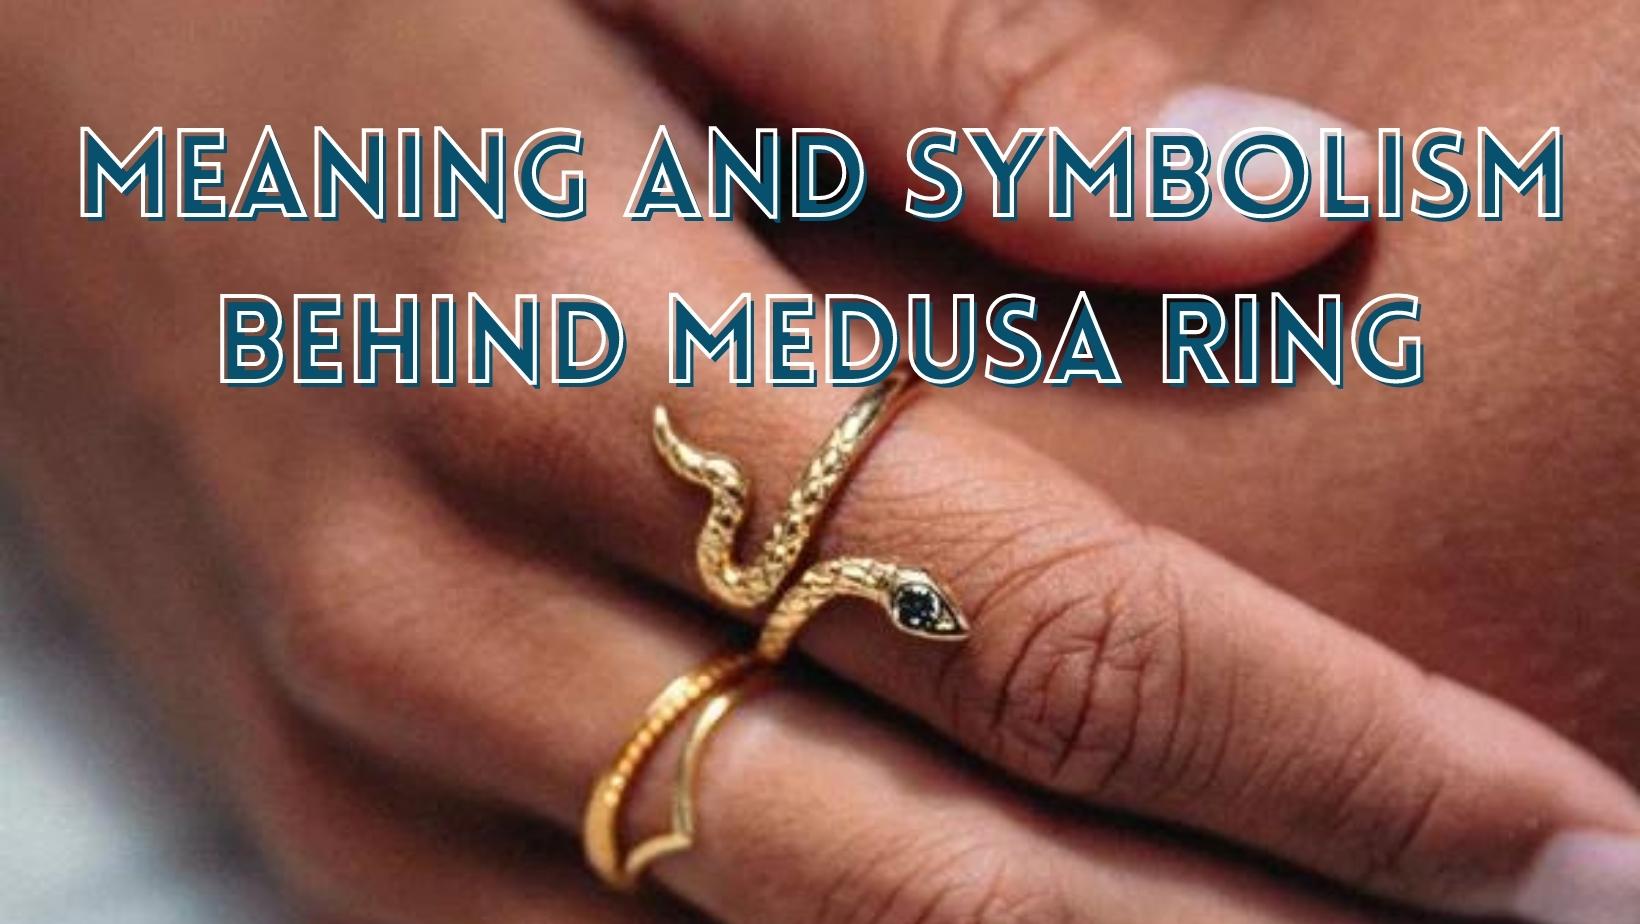 Meaning and symbolism behind Medusa ring